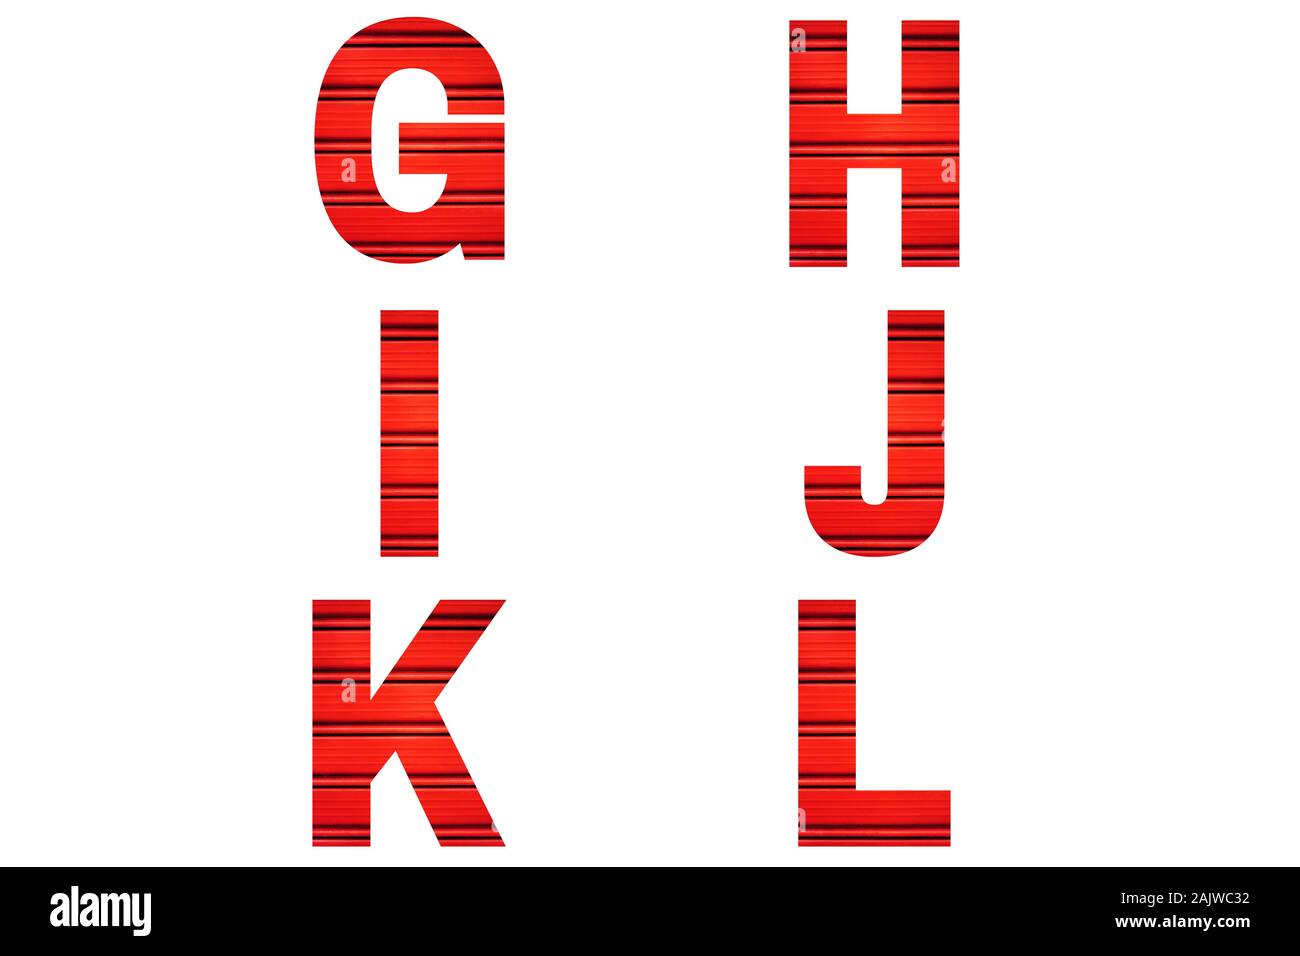 Red font Alphabet g,h,i,j,k,l made of red painted shutter or roller blind. Bright alphabet. Stock Photo